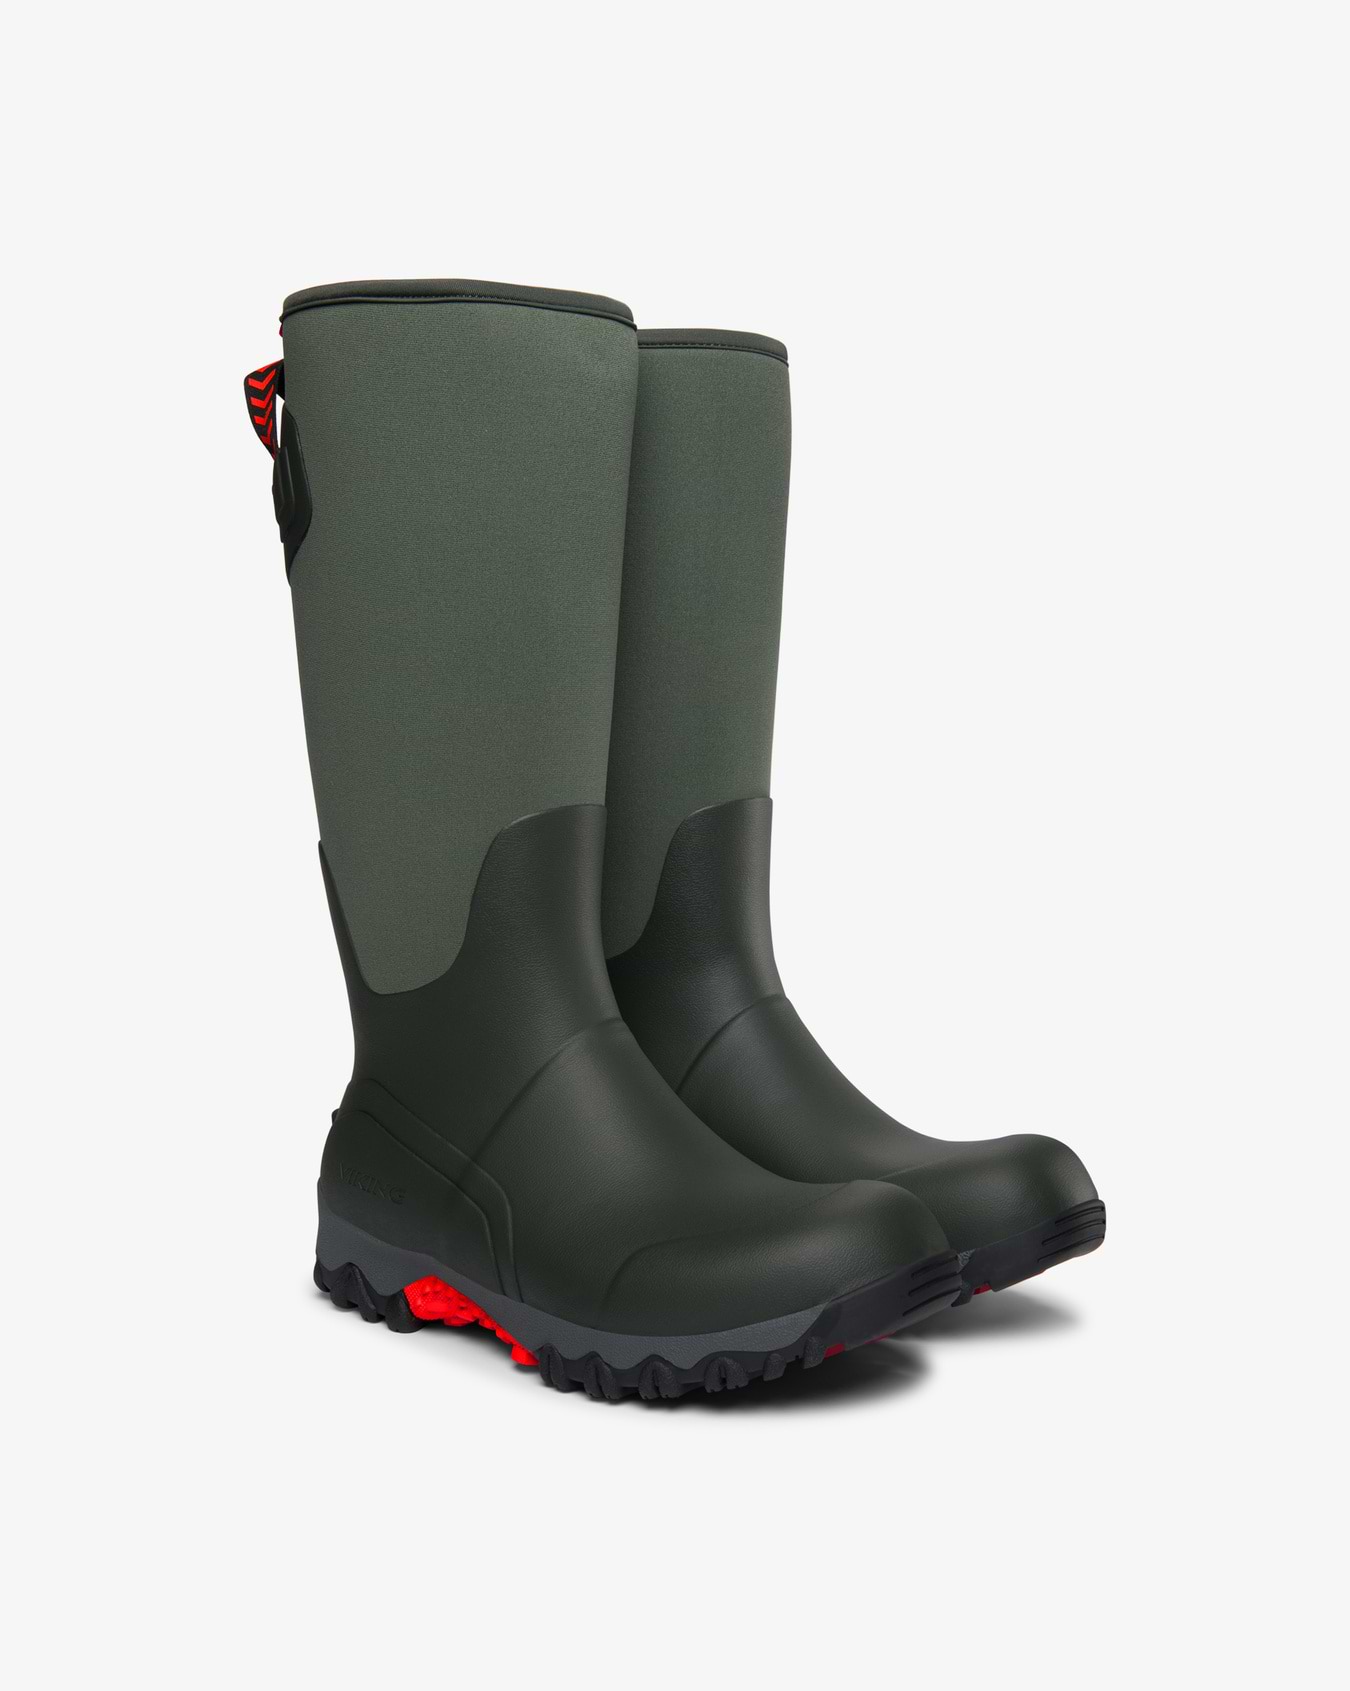 Viking Trophy Neo Unisex Rubber Boots